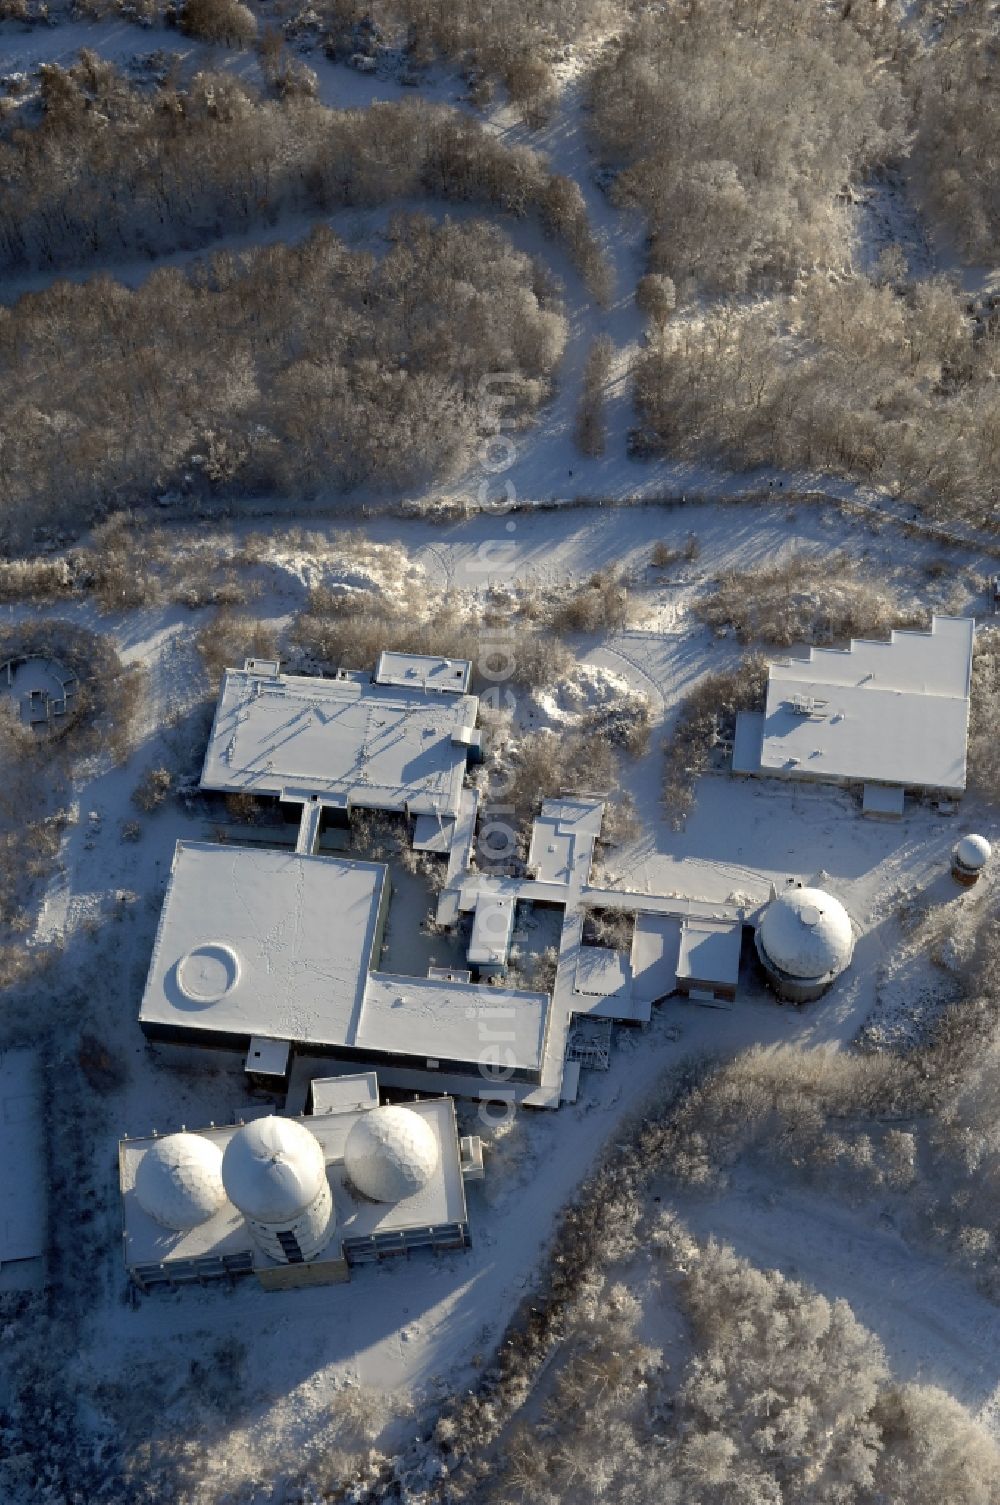 Aerial photograph Berlin - Wintry snowy ruins of the former American military interception and radar system on the Teufelsberg in Berlin - Charlottenburg